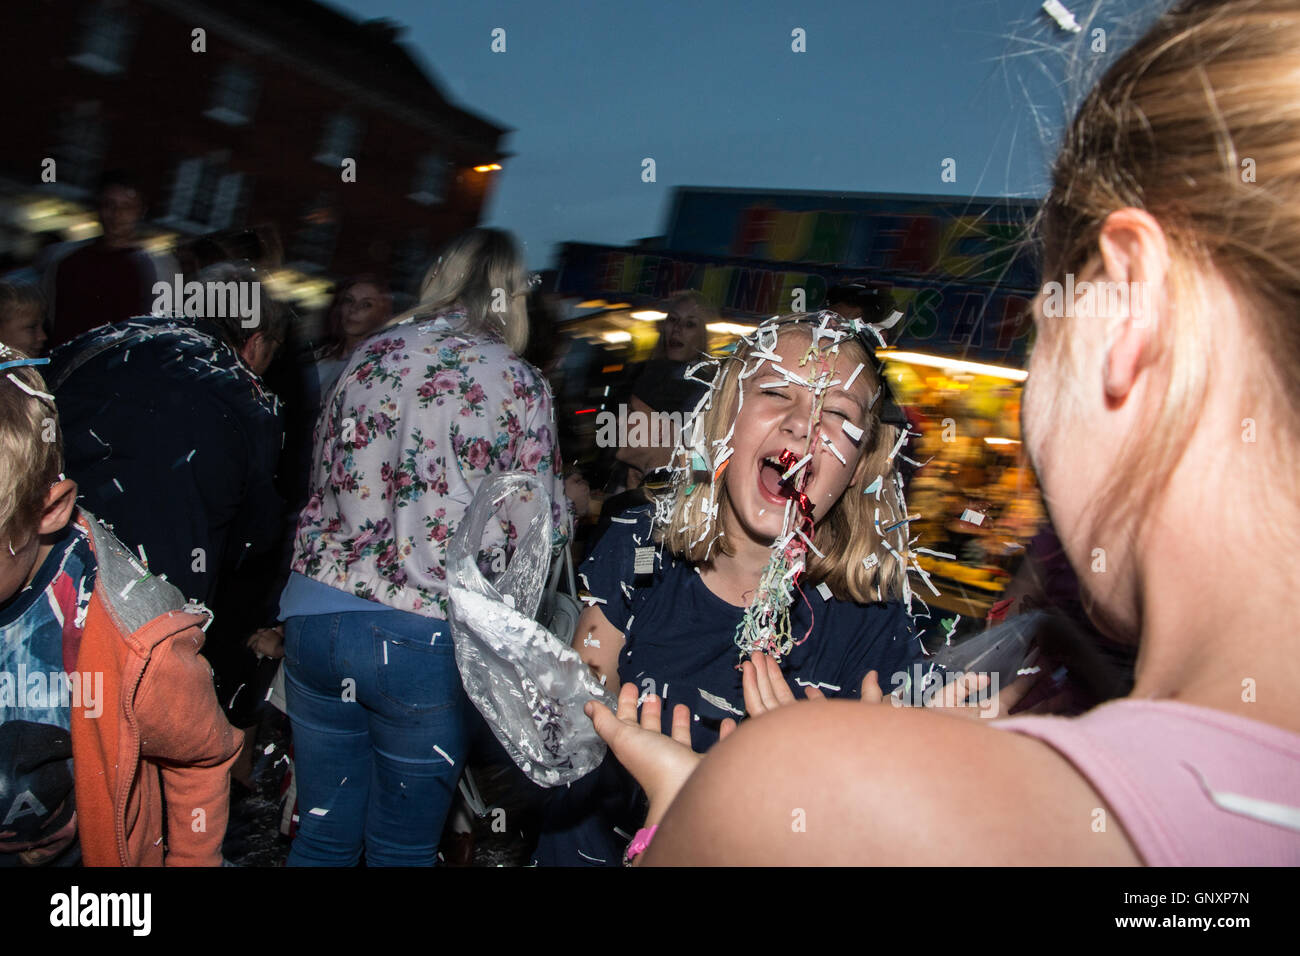 Devizes Wiltshire, UK. 31st Aug, 2016. People throwing confetti during the confetti battle event. Confetti is fired over the crowd gathered in the market square and supplies also available for throwing around. Now part of the Devizes International Street Festival the tradition has been a part of the annual Devizes Street Carnival celebrations since 1955 and stems from the former practice of throwing rose petals at carnival floats. Credit:  Paul Francis/Alamy Live News Stock Photo